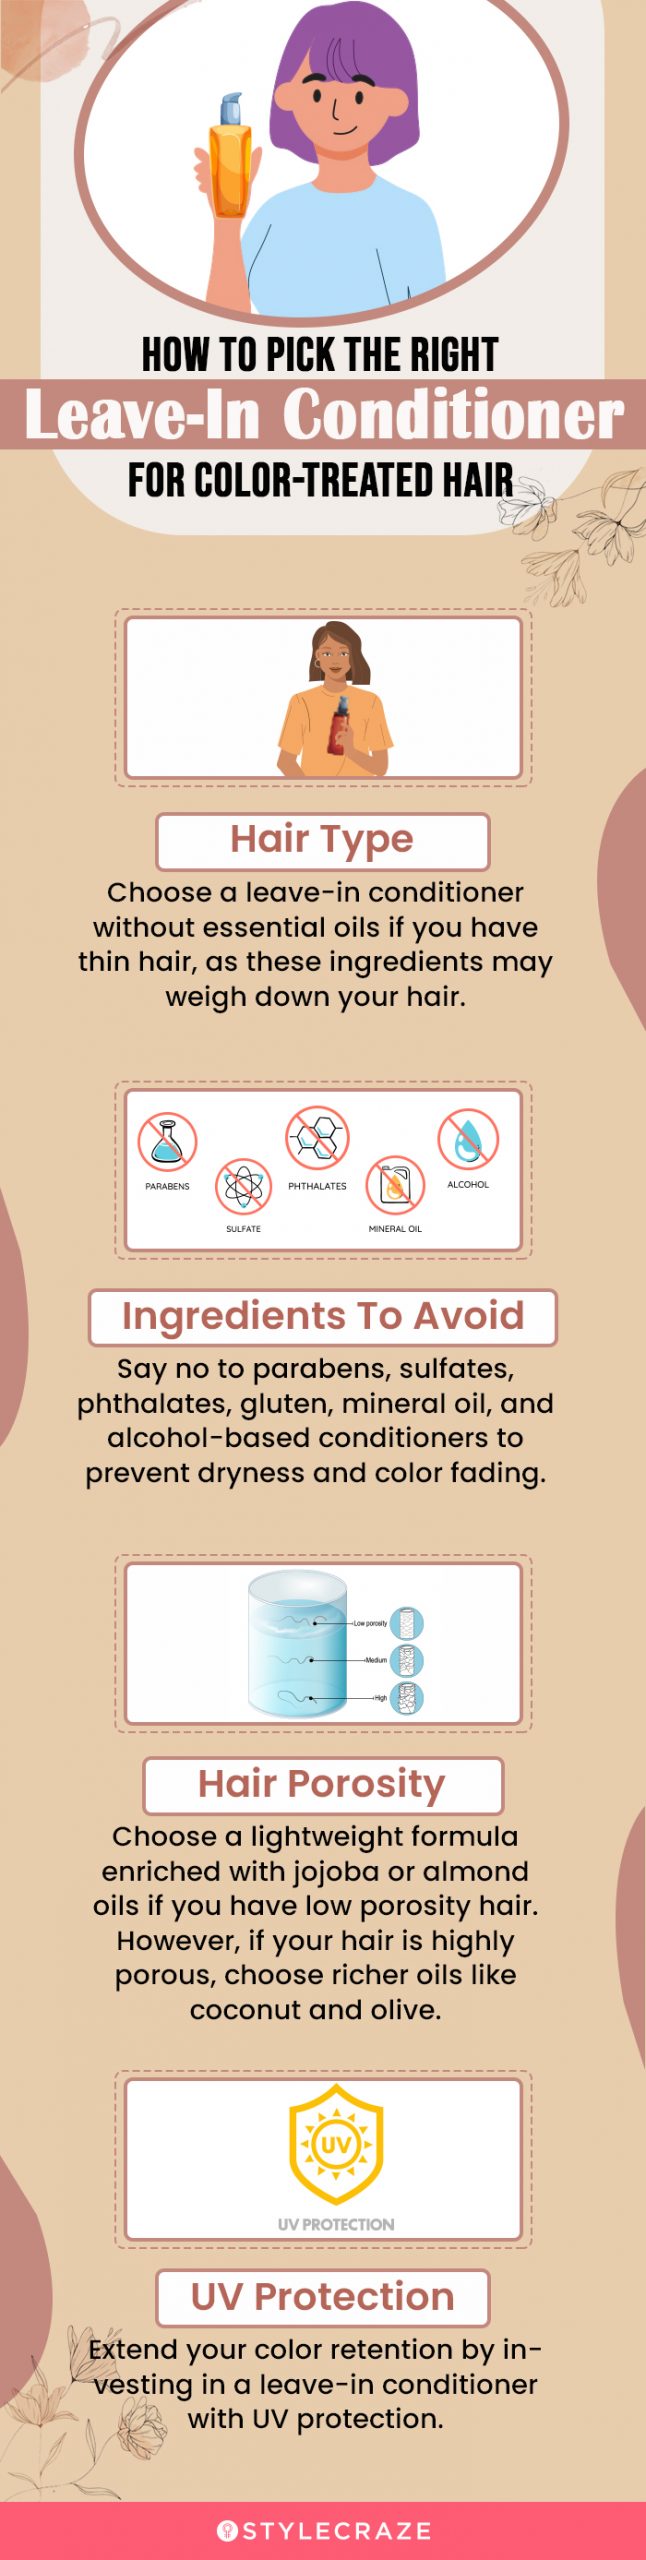 How To Pick The Right Leave-In Conditioner For Color-Treated Hair [infographic]